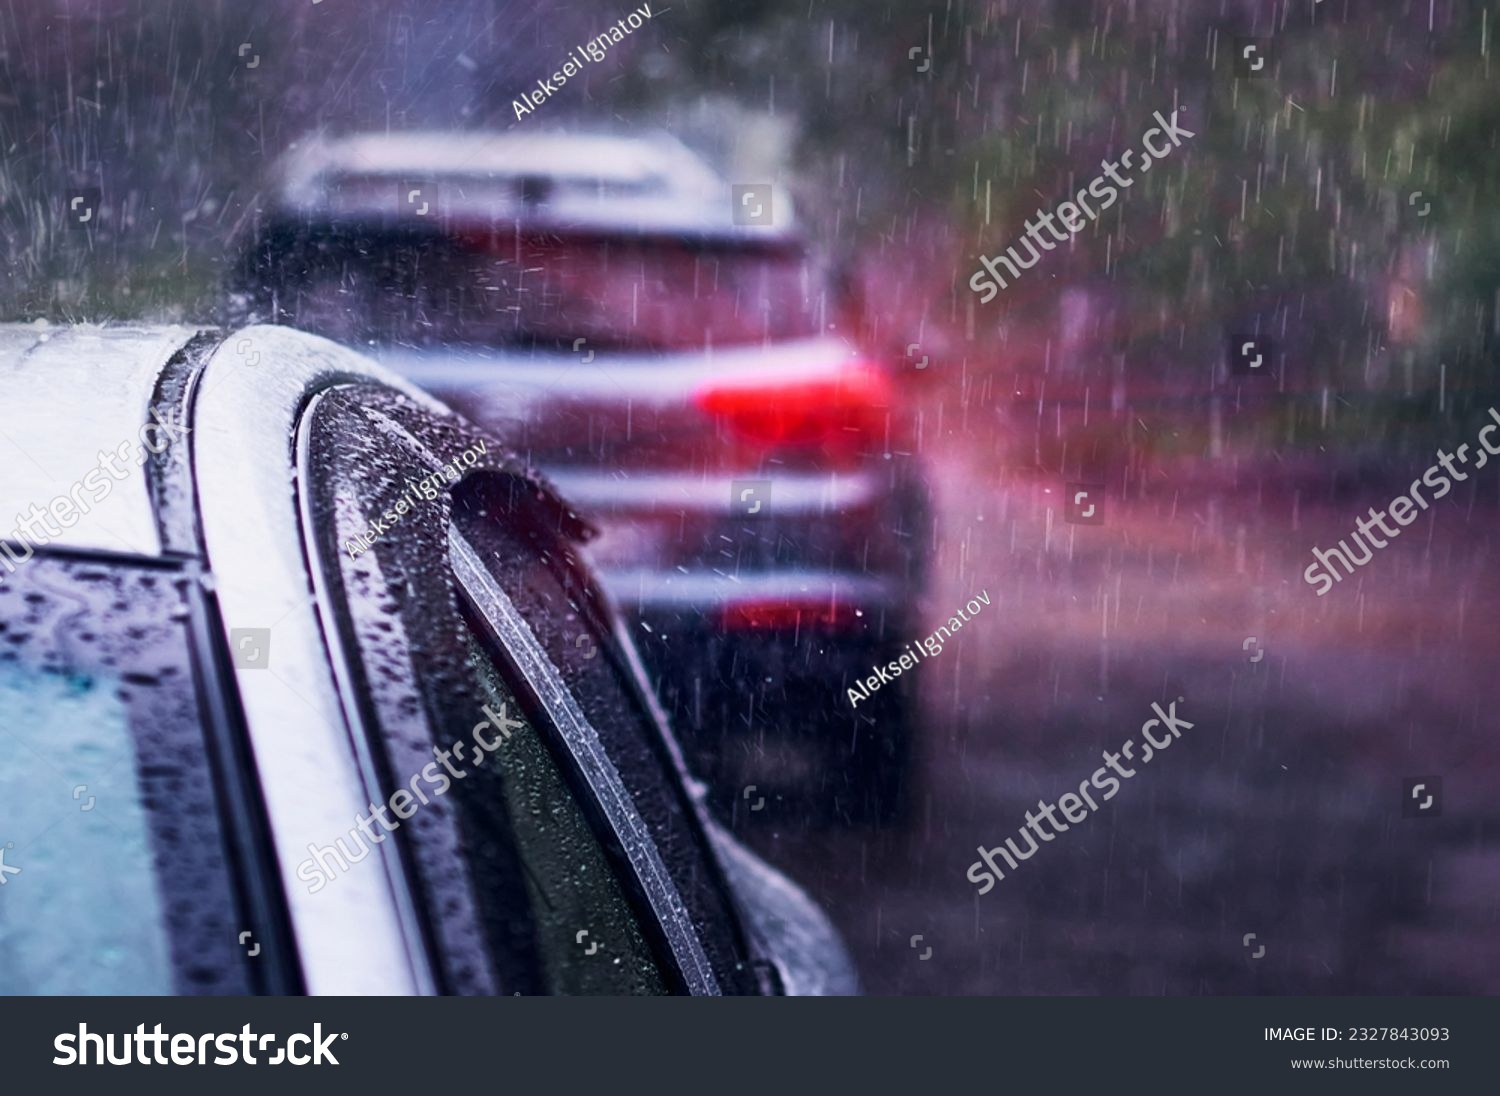 Heavy rain falls on the roof of a car during a thunderstorm. Red brake light in the dark. The concept of auto insurance and natural disasters. Driving on cloudy rainy days. Selective focus. #2327843093